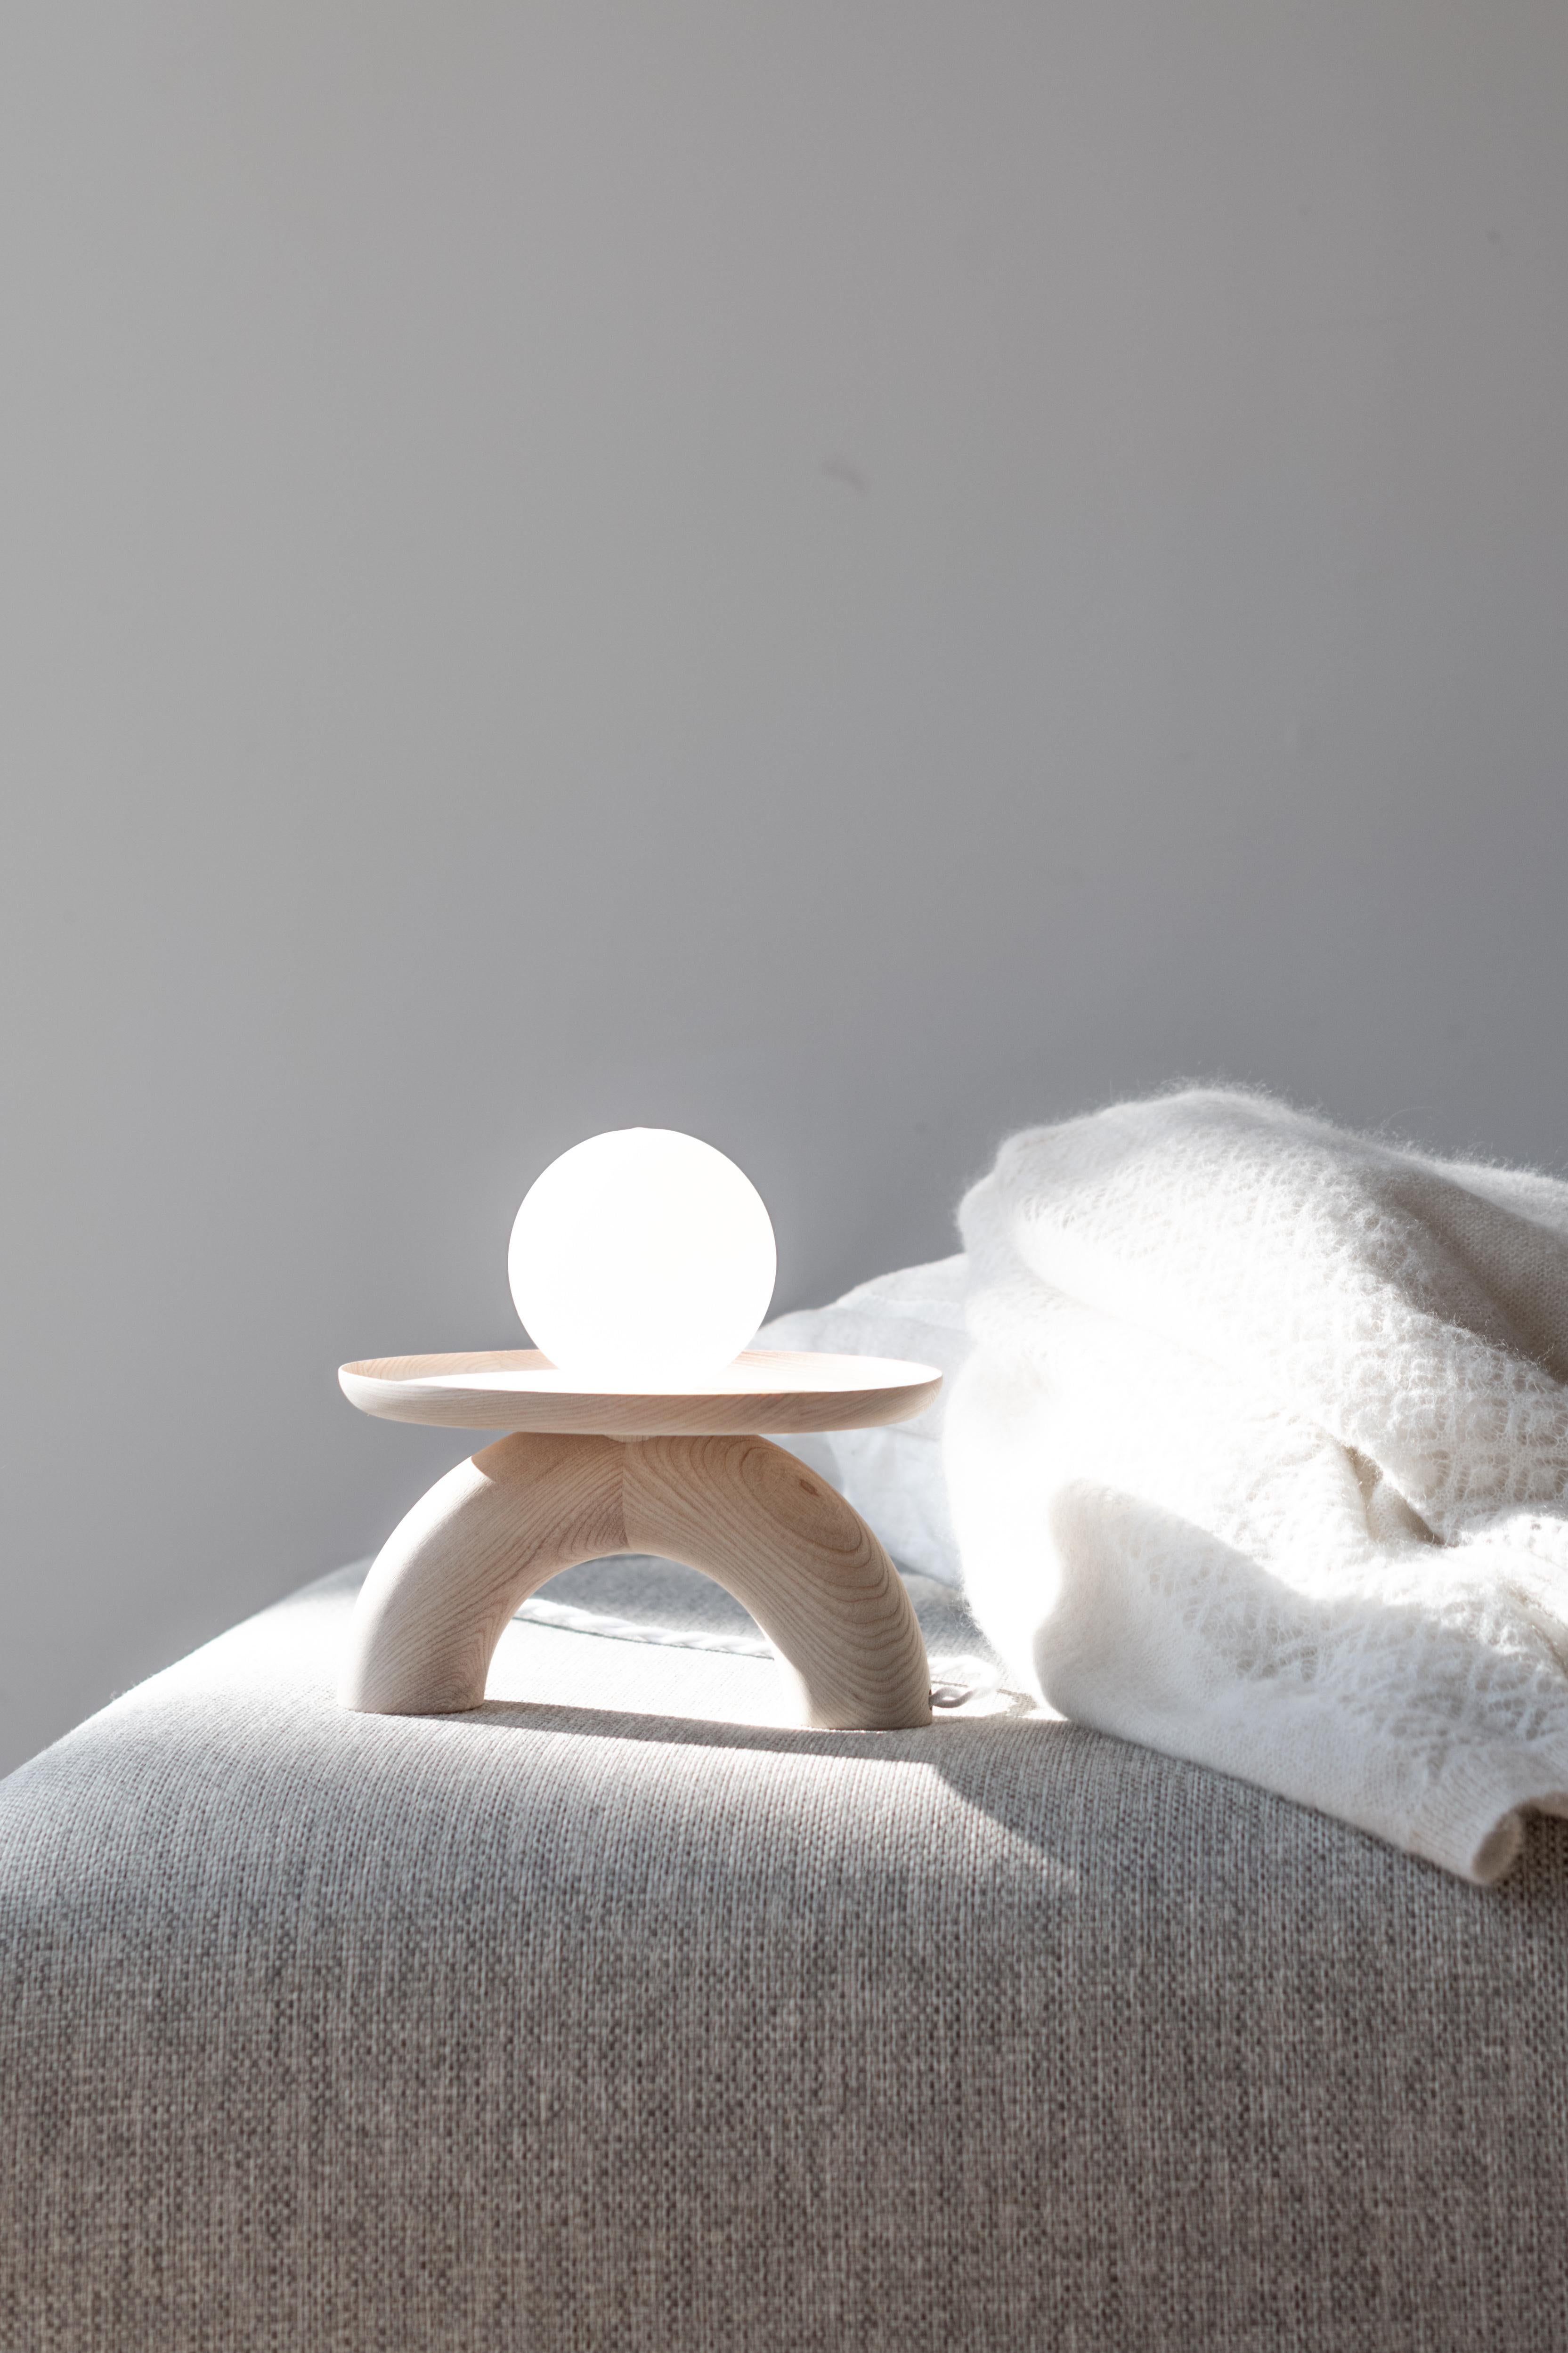 Bleached Ash Popylight Lamp by Mademoiselle Jo
Dimensions: Ø 23 x H 23.5 cm.
Materials: Bleached ash wood and opaline glass.

Two wood colors available: Bleached ash and black stained ash. Please contact us.

Small curved tray, composed of an arched